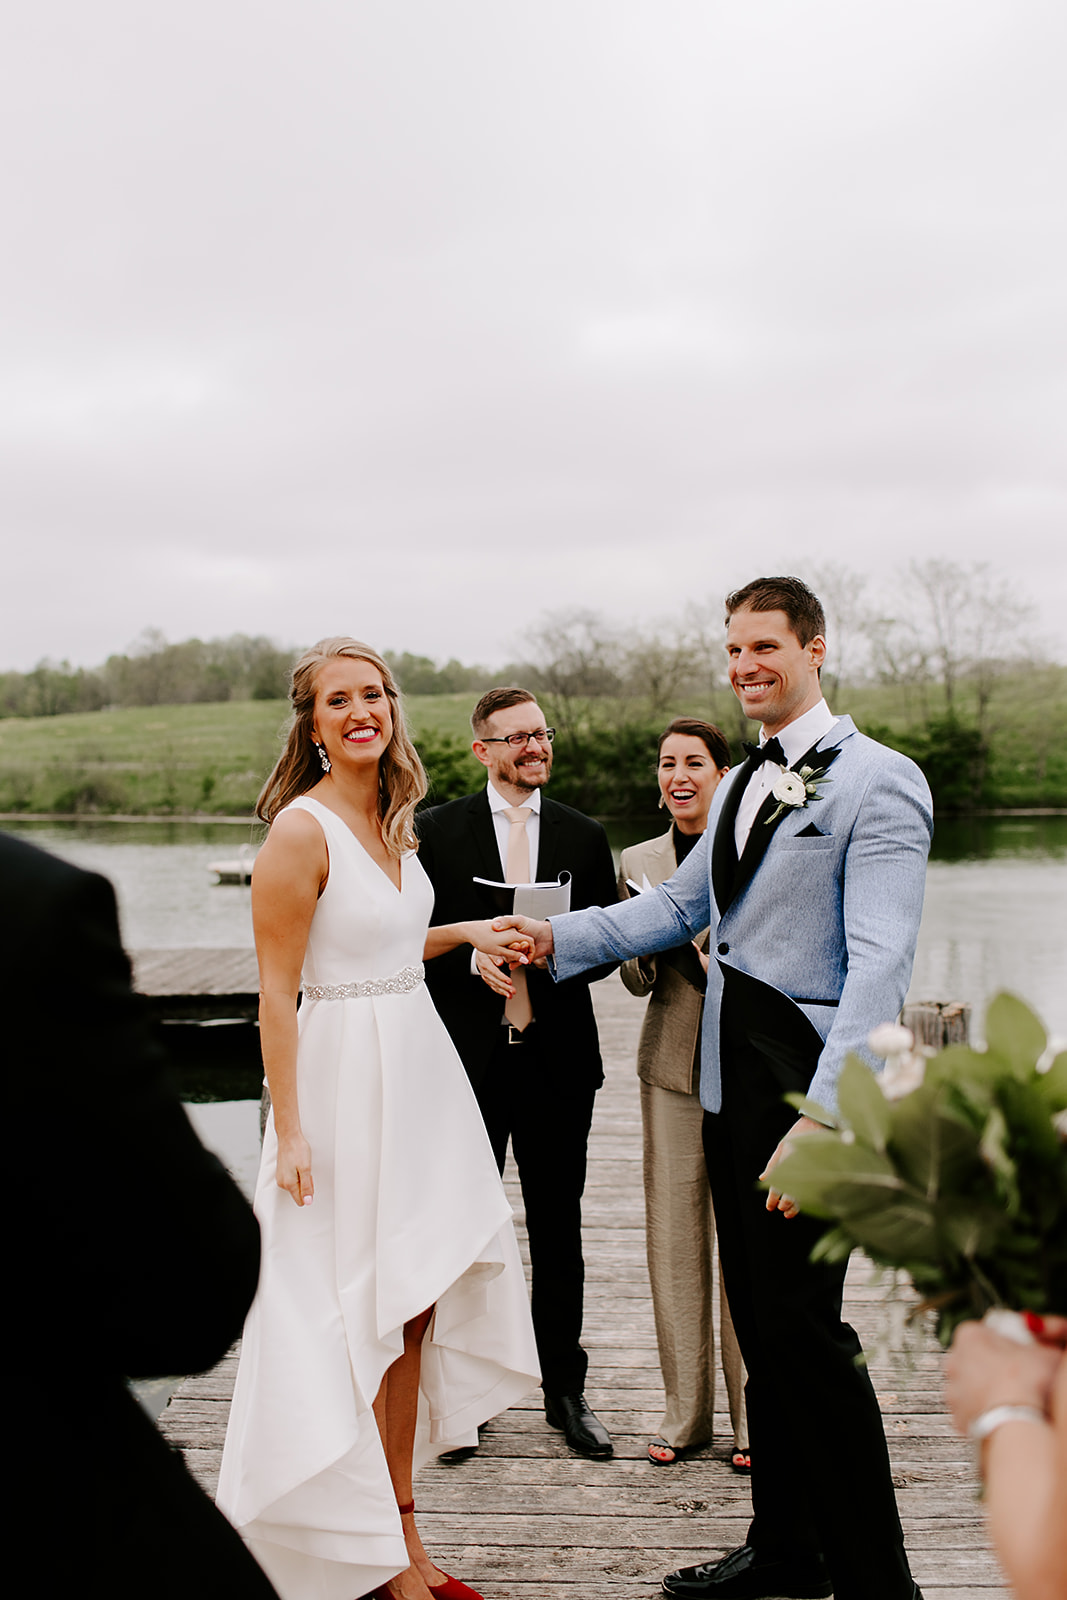 Traders Point Creamery Elopement in Zionsville, Indiana